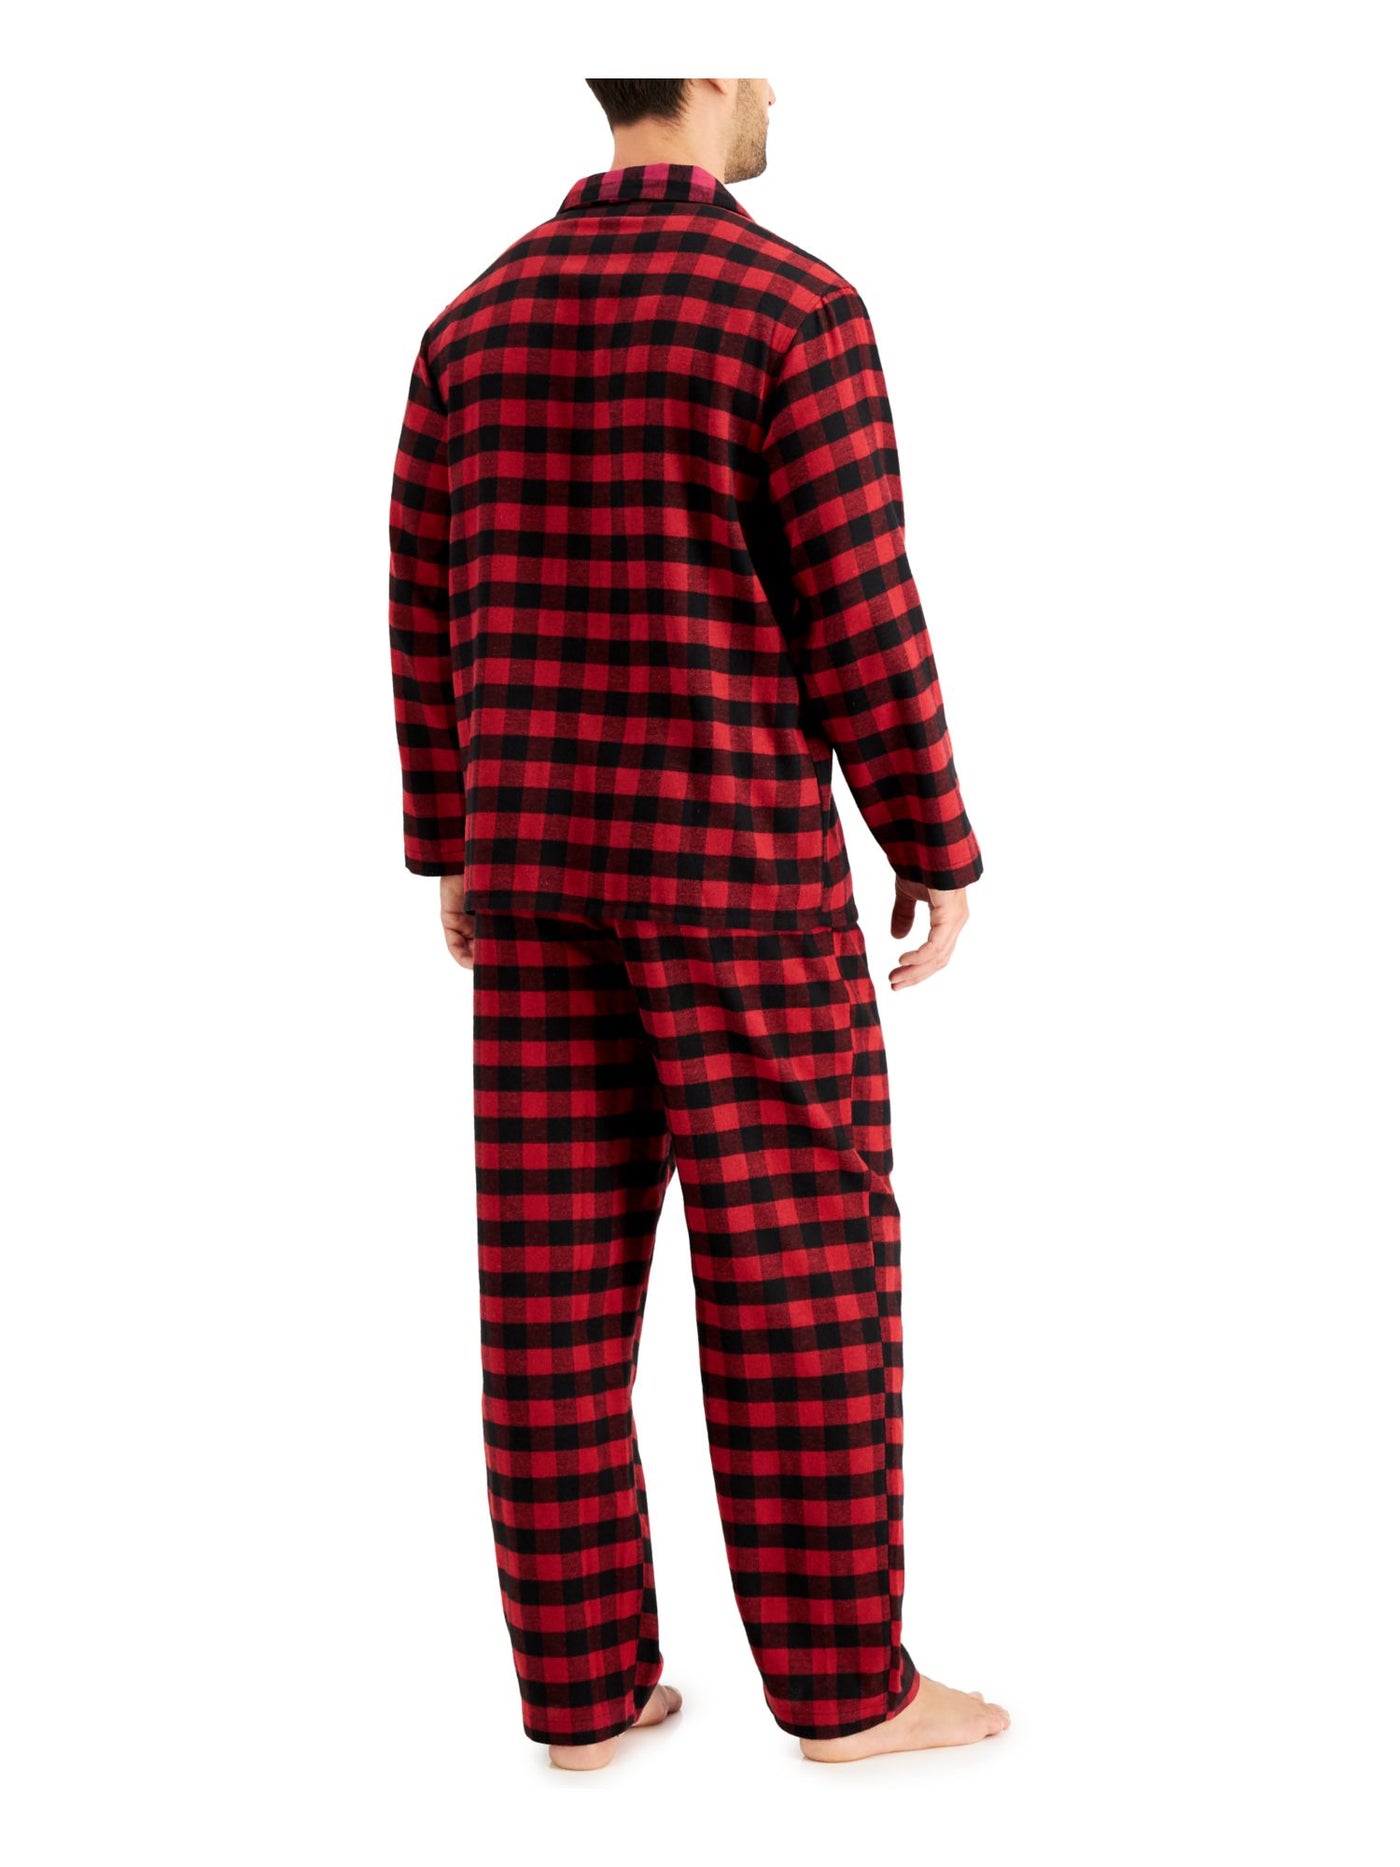 CLUBROOM Mens Red Plaid Notched Collar Long Sleeve Button Up Top Straight leg Pants Flannel Pajamas S